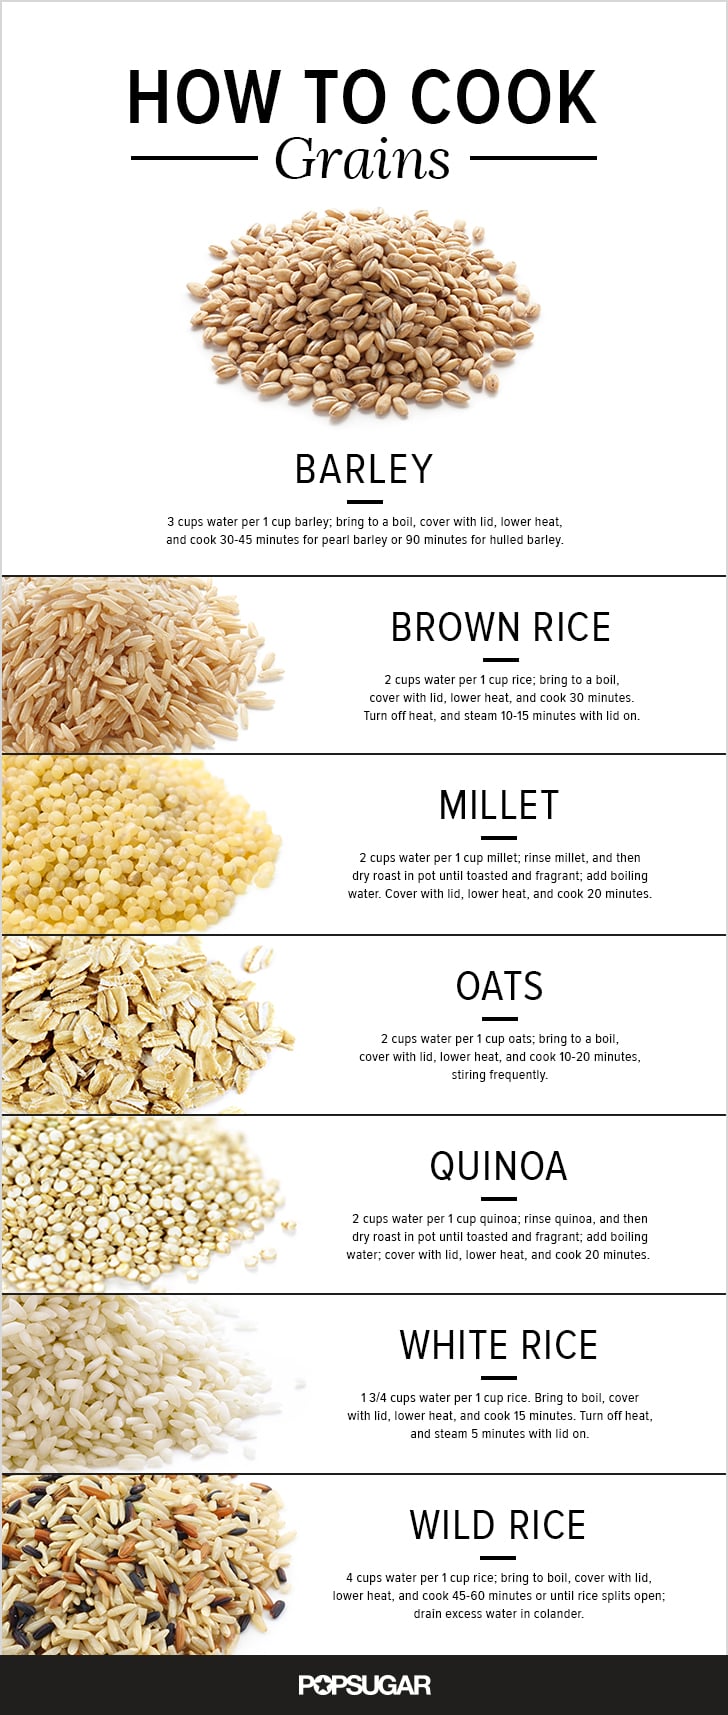 How to cook every kind of grain.